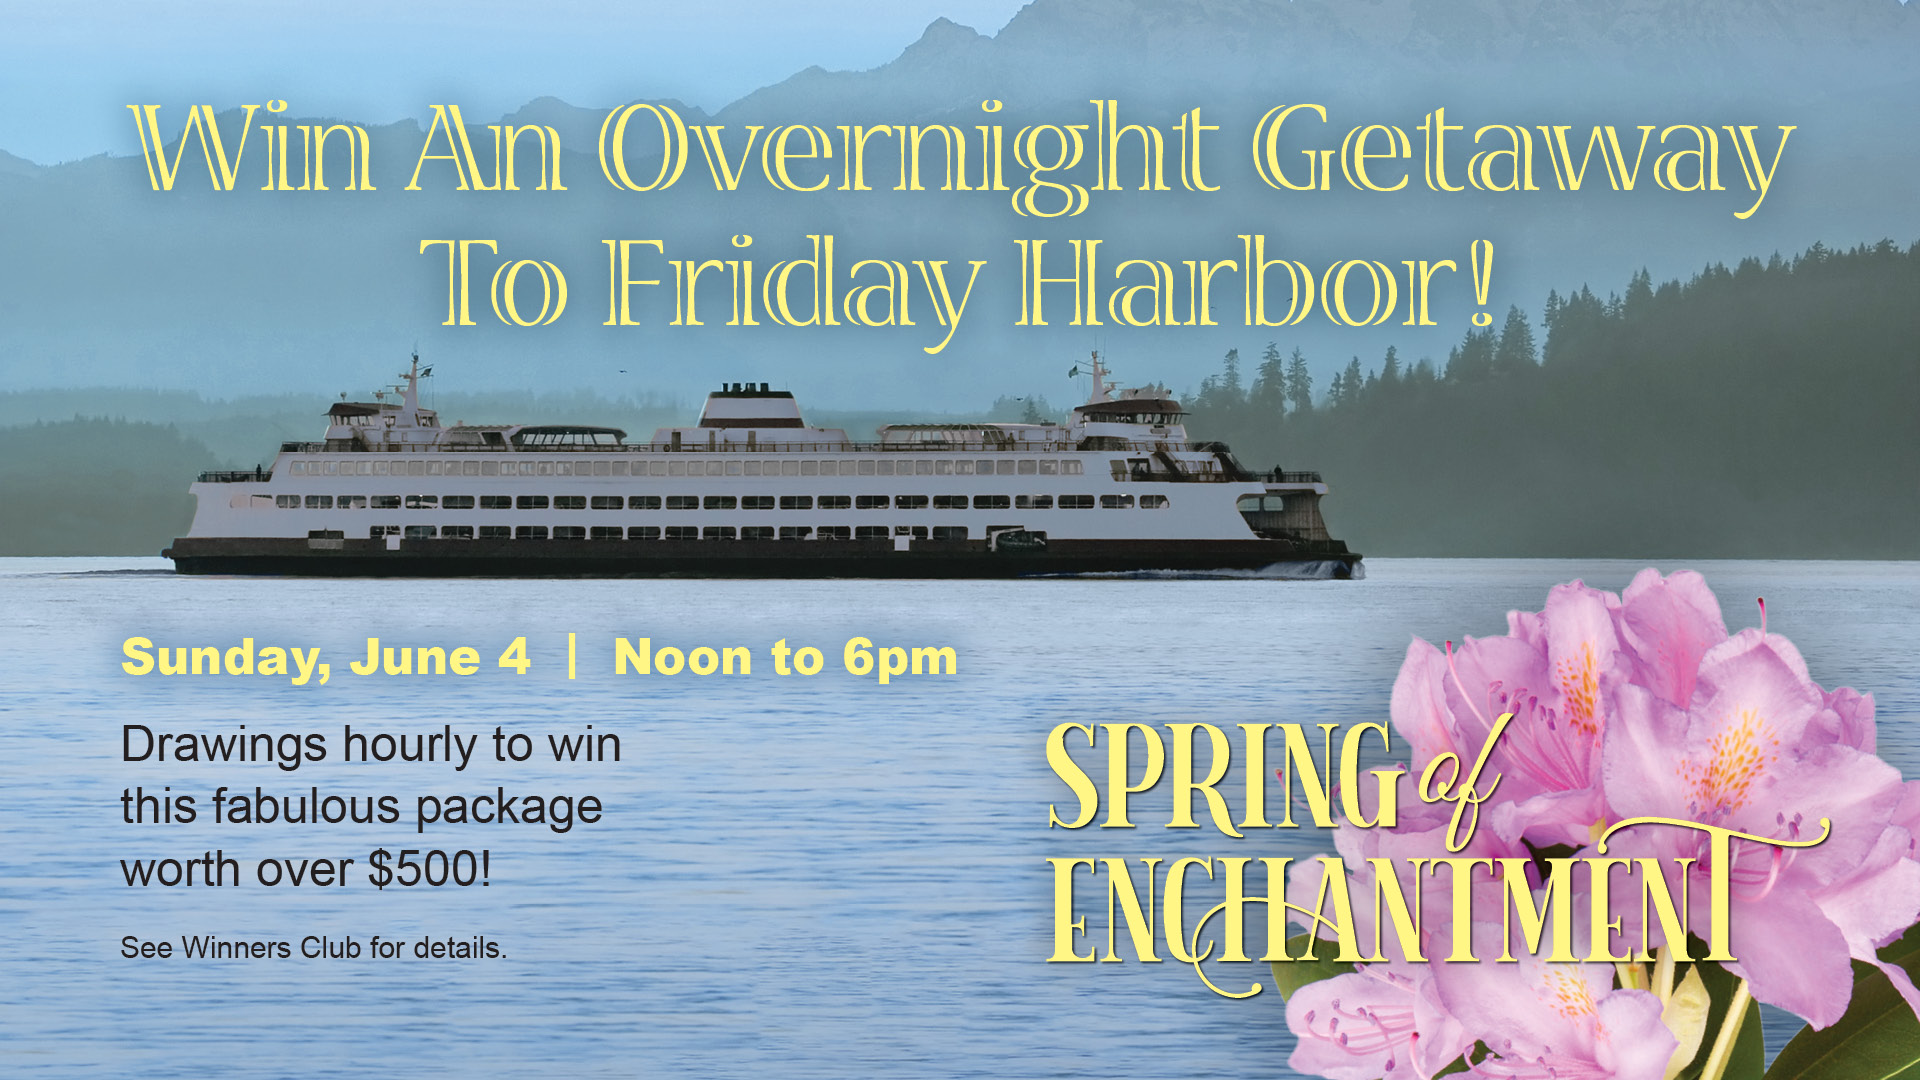 Spring of Enchantment - win an overnight getaway to Friday Harbor! Sunday, June 4. Noon to 6pm. Drawings hourly to win this fabulous package worth over $500! See Winners Club for details.